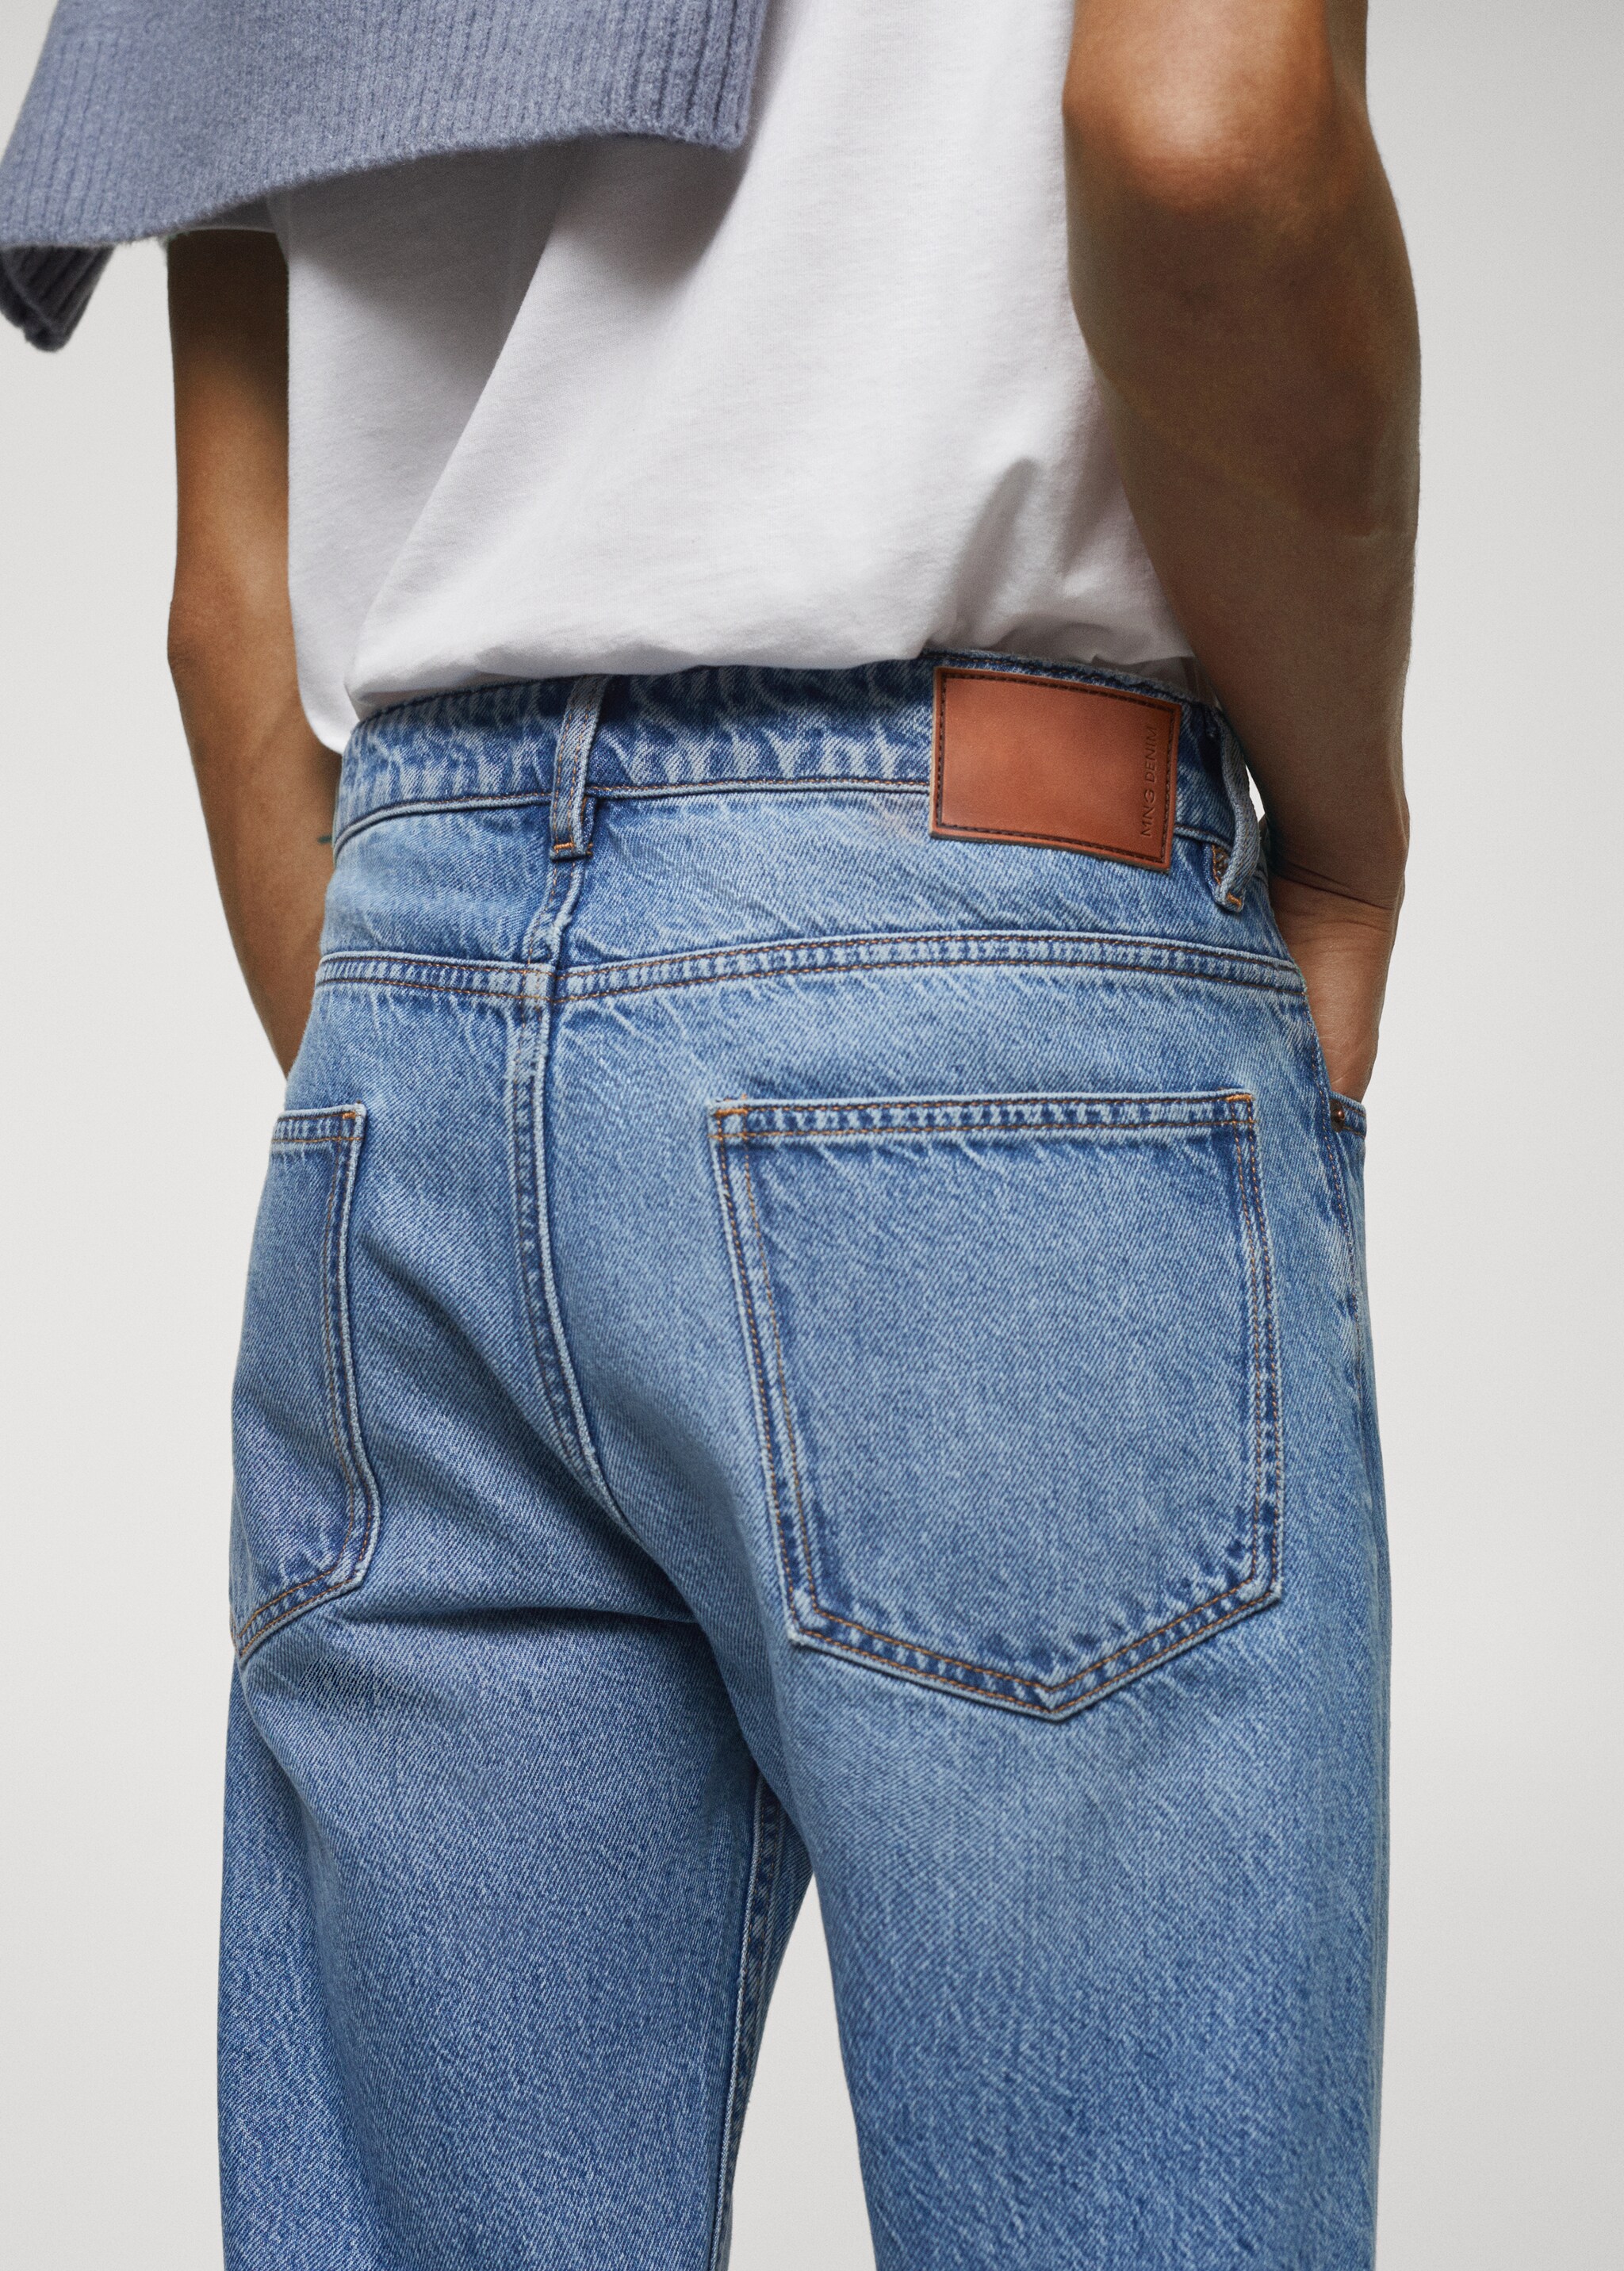 Sam tapper fit jeans - Details of the article 6